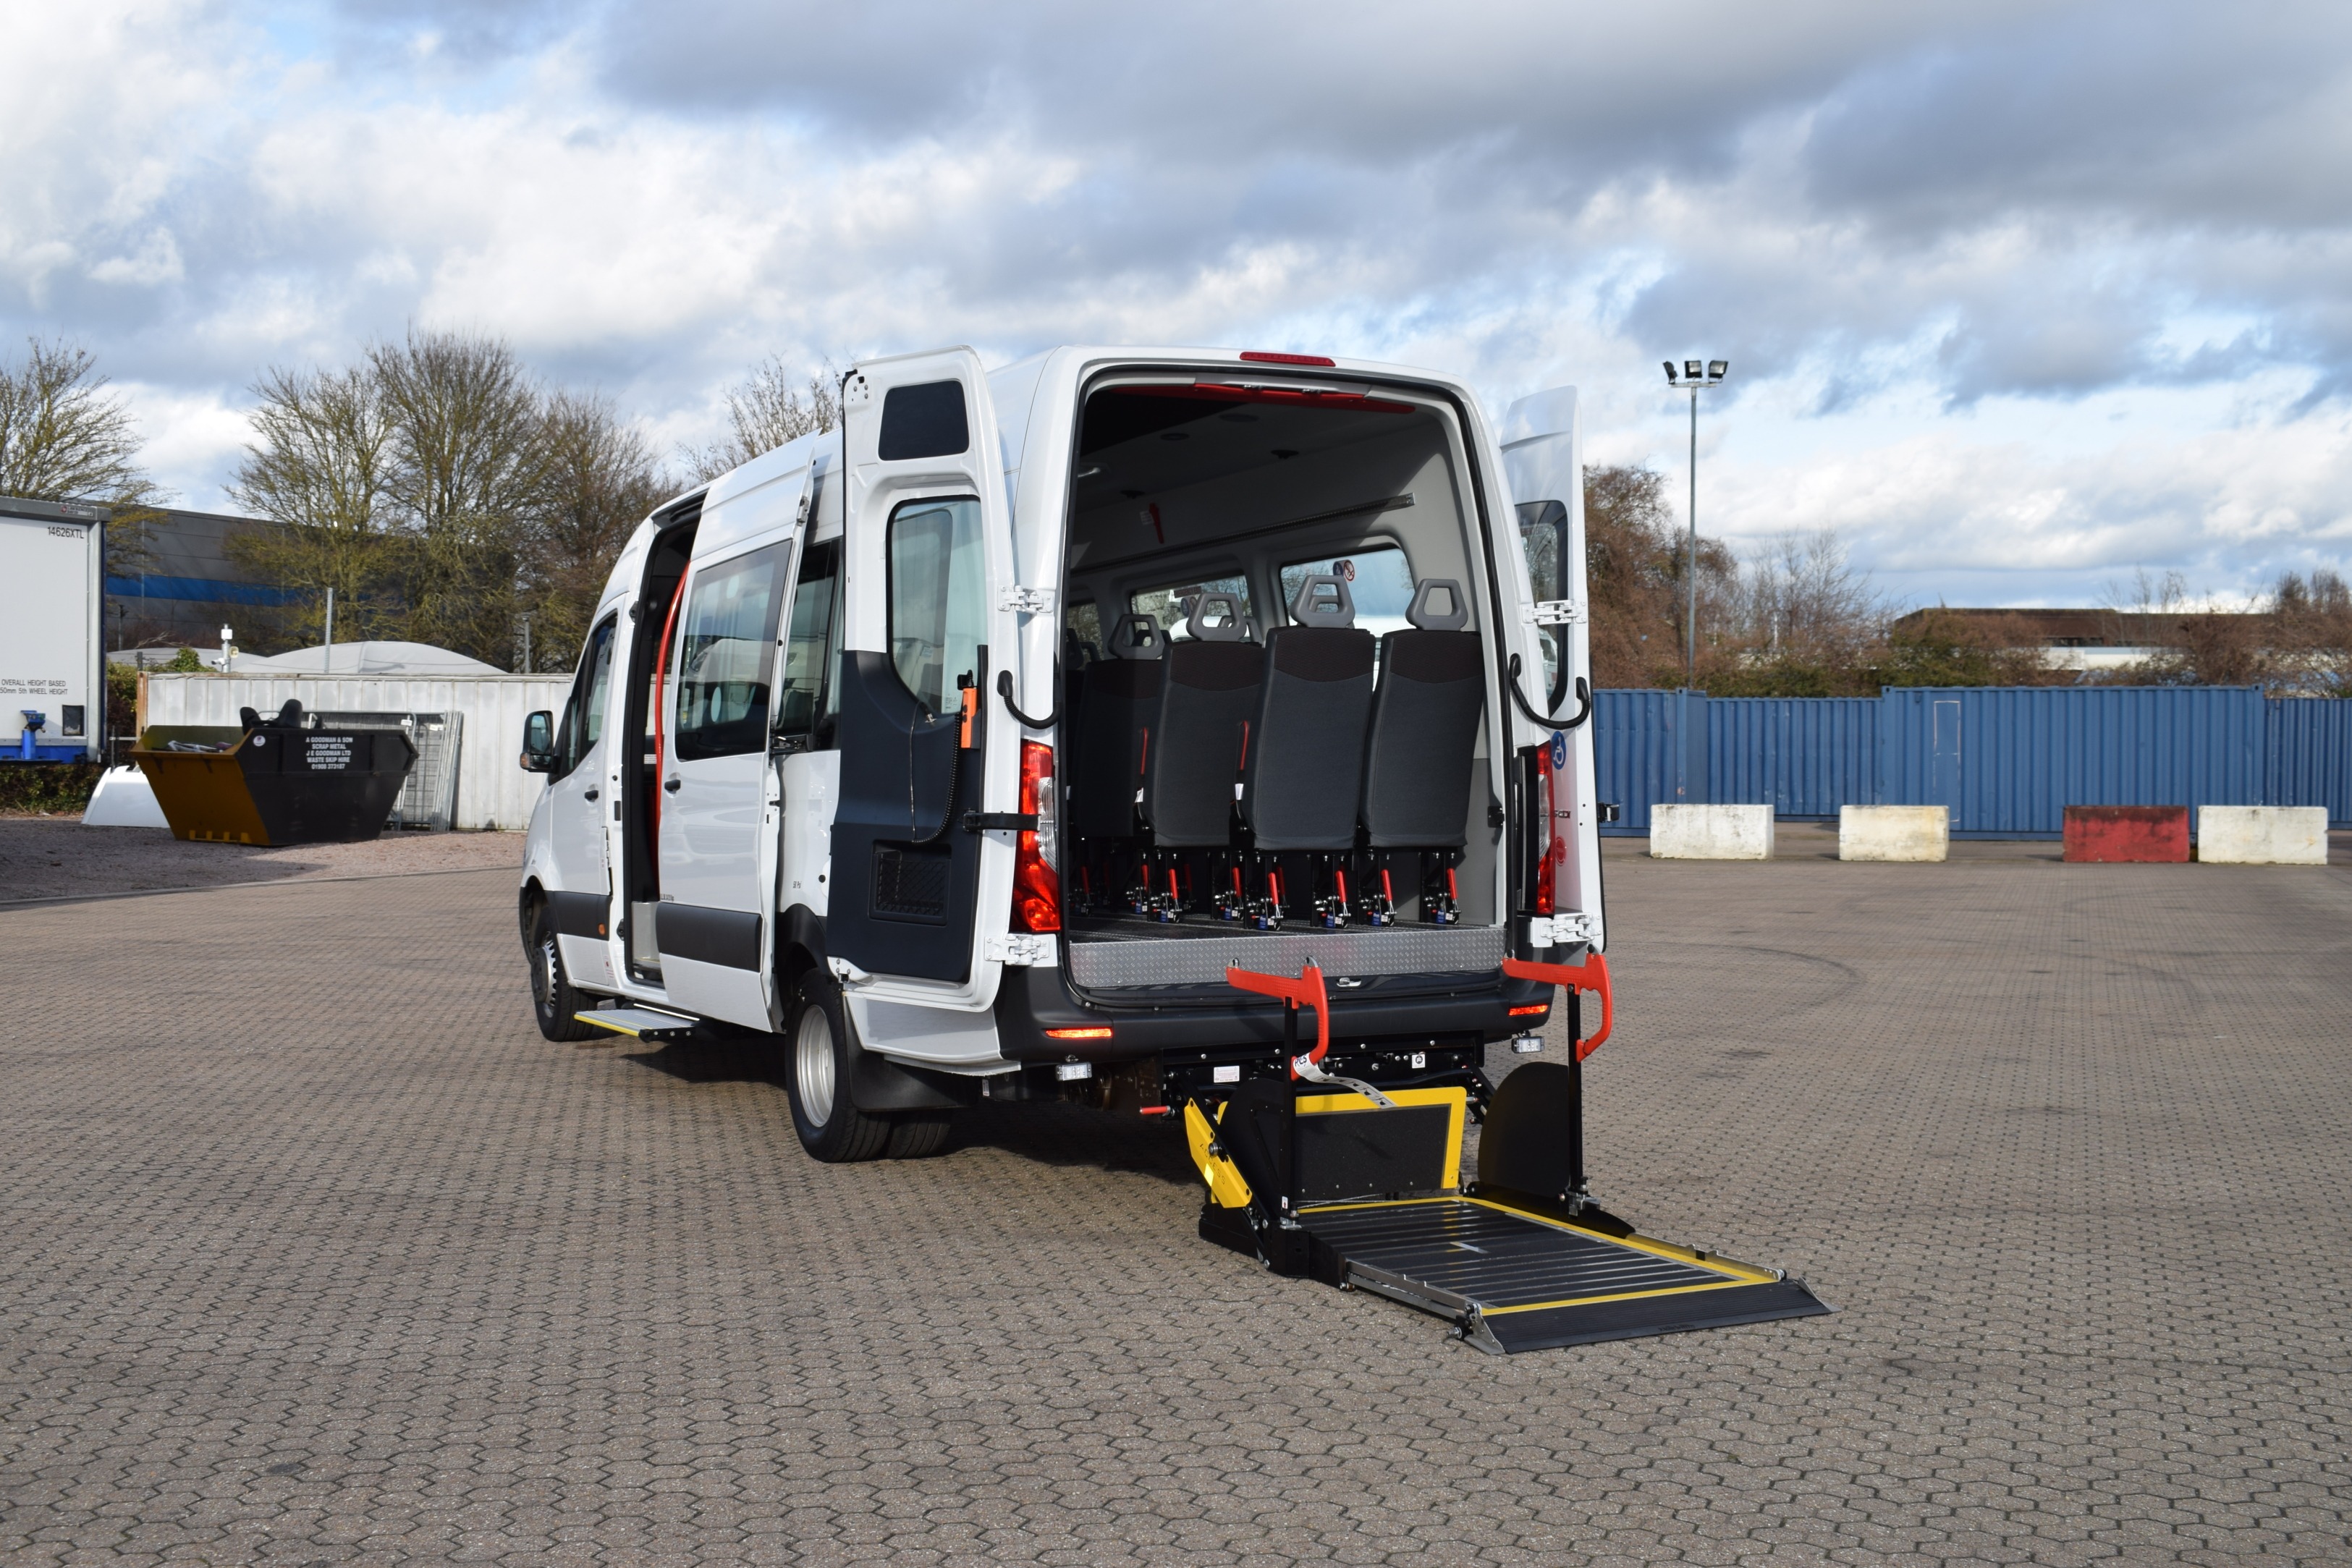 Dawsongroup bus and coach provides accessible transport solutions to a major UK council.